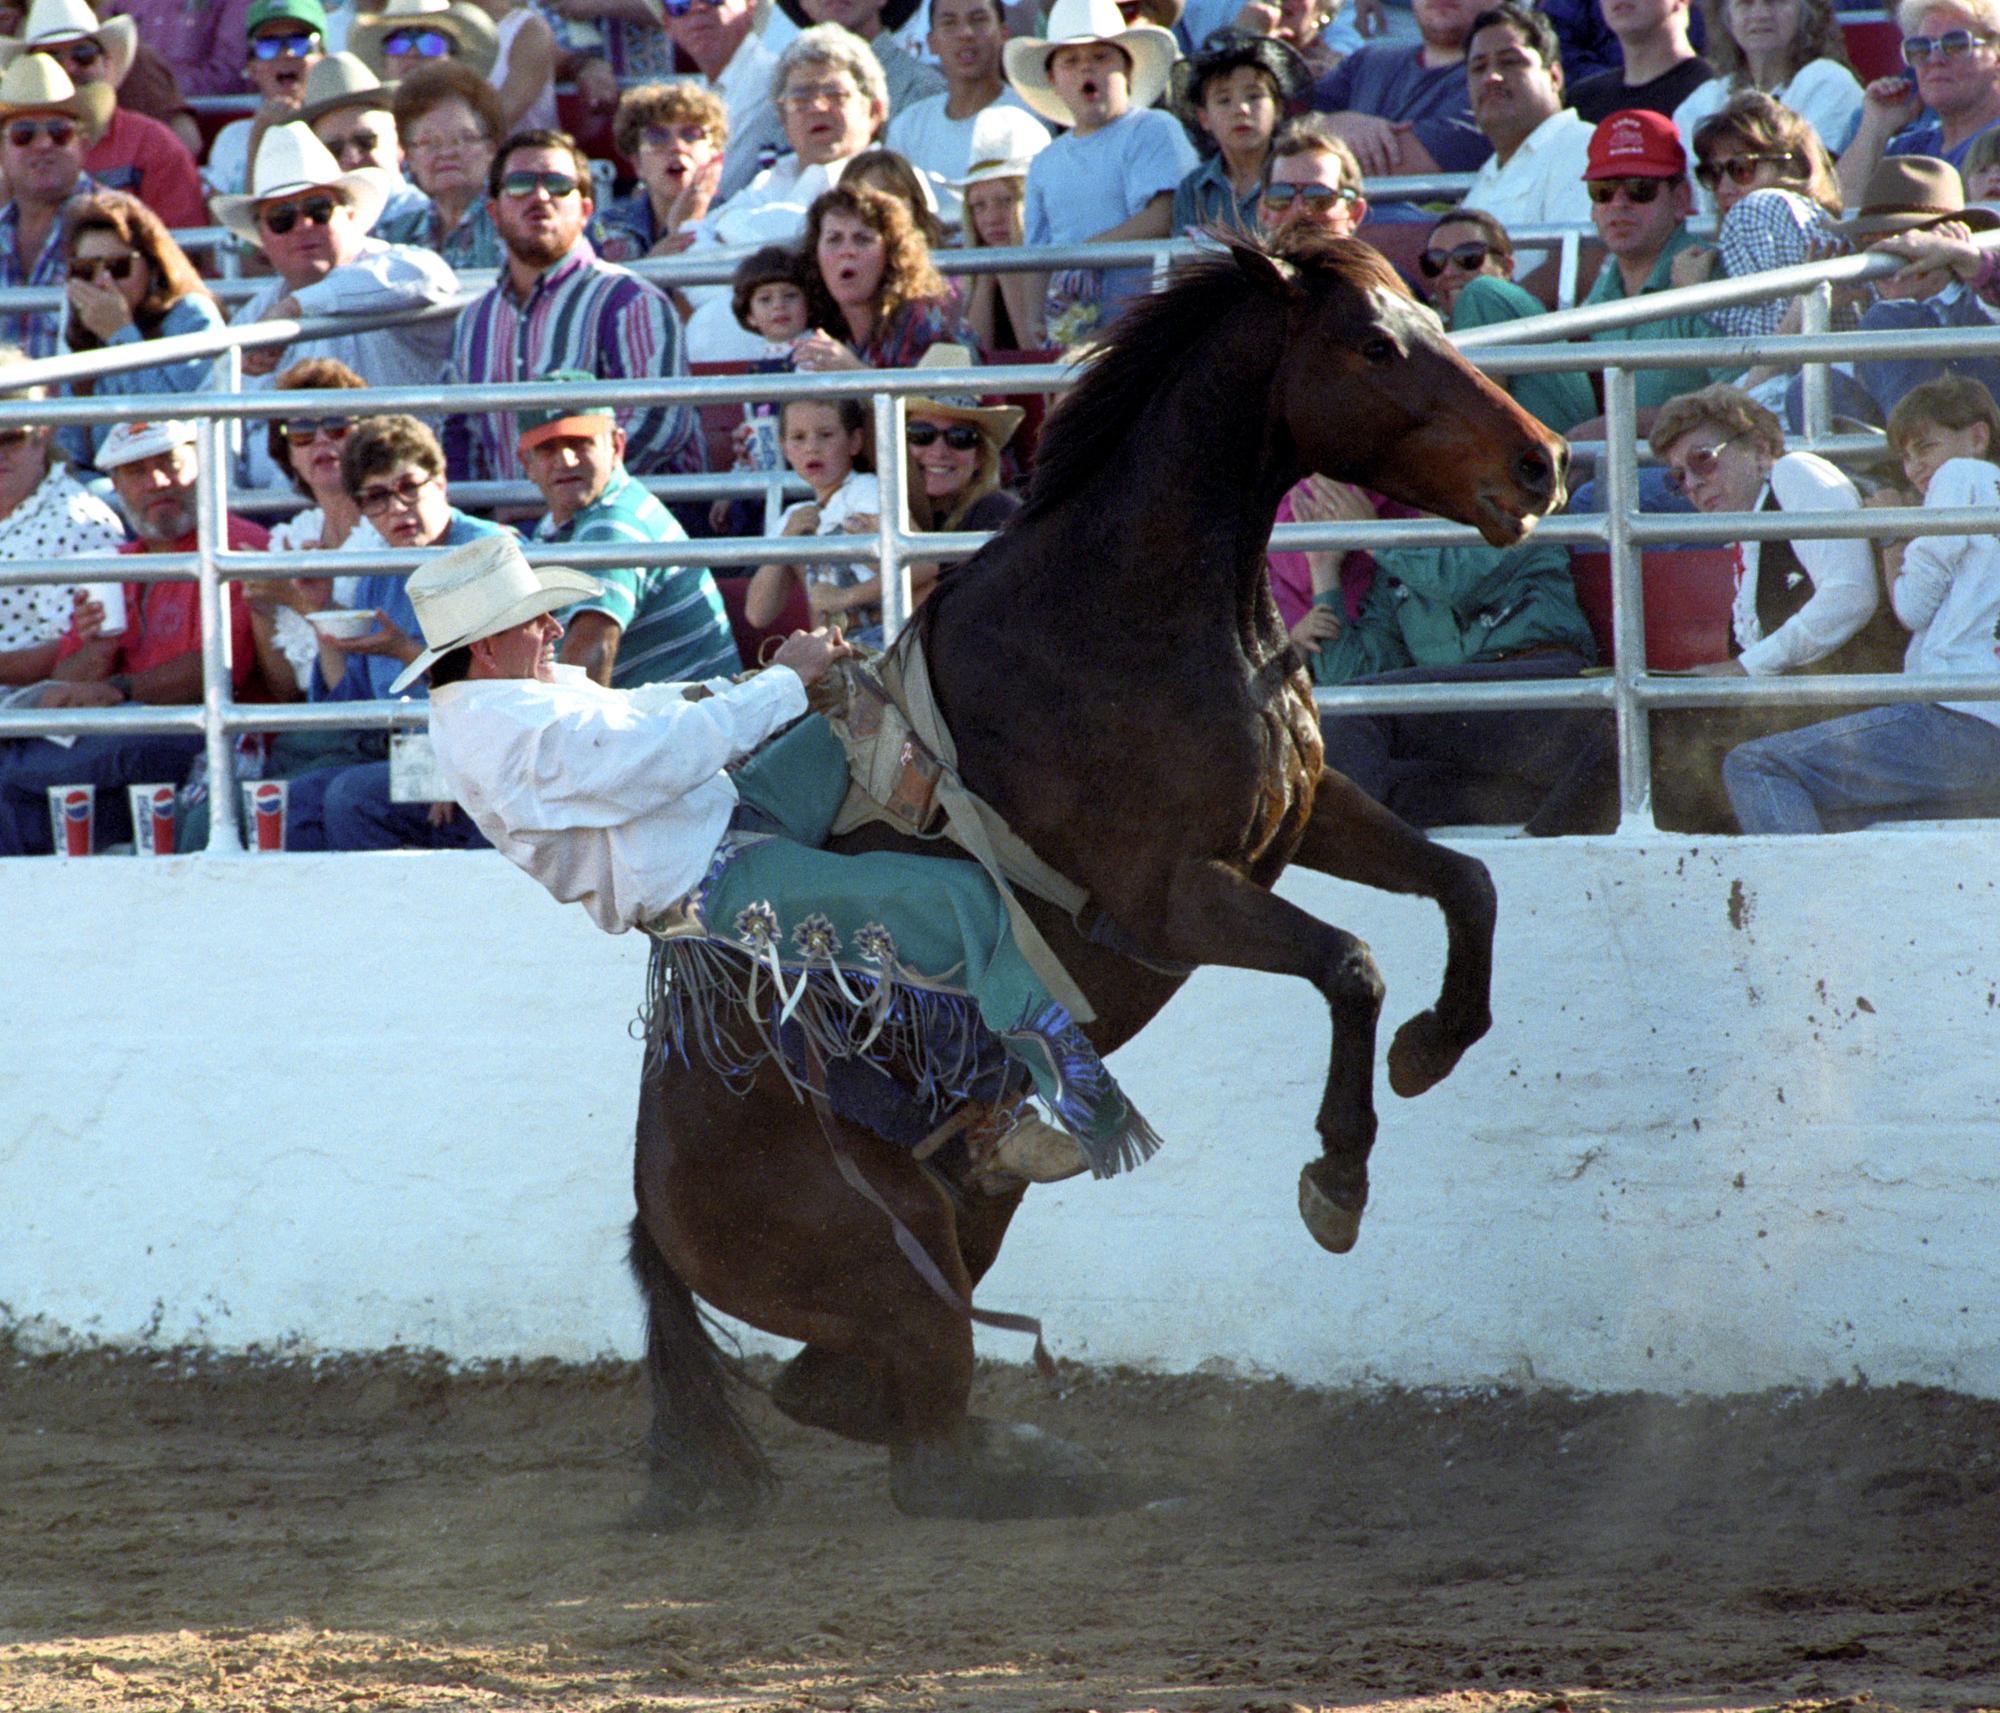 Imperial Valley Rodeo (1992) - Tough Hombre #2